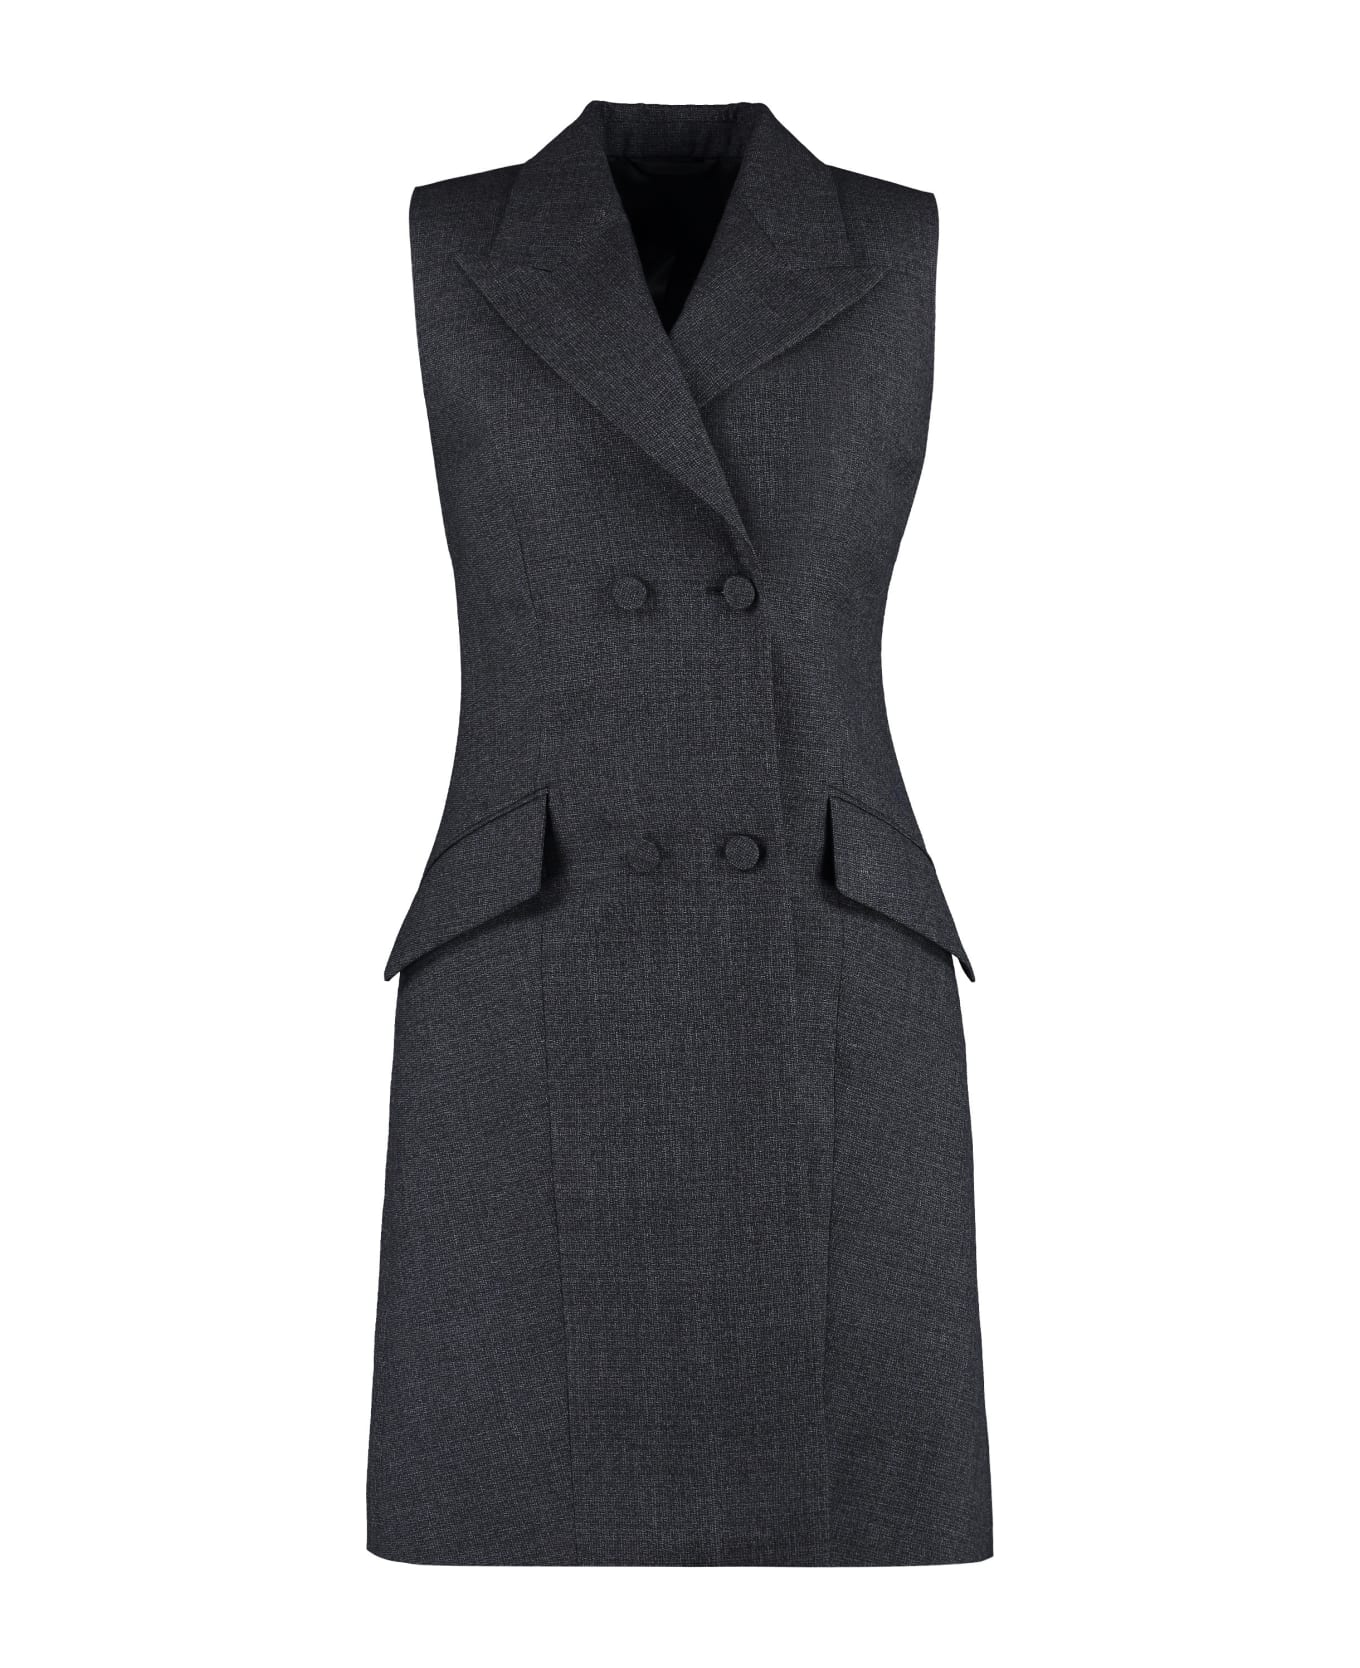 Givenchy Double Breasted Blazer Dress - grey